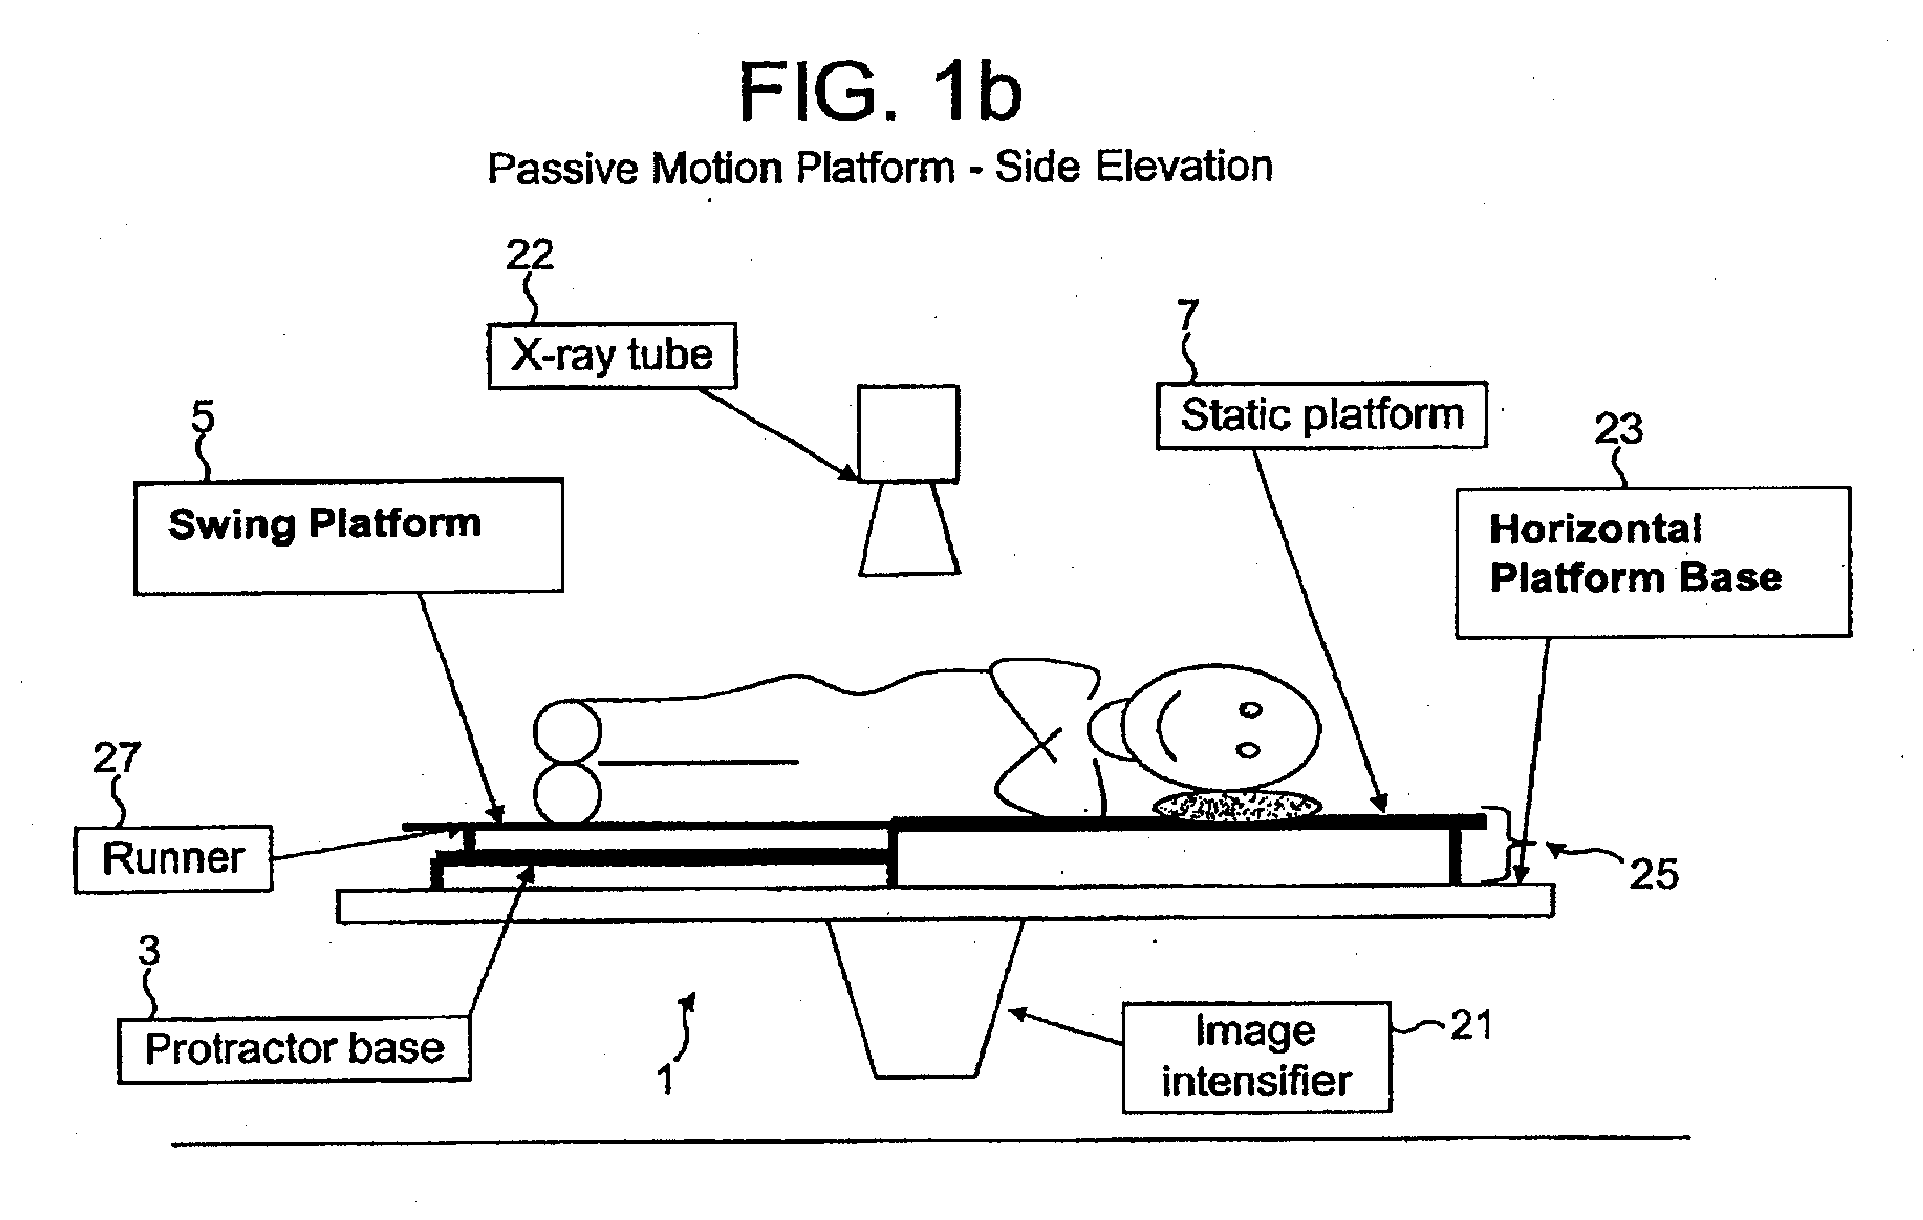 Apparatus and Method for Imaging the Relative Motion of Skeletal Segments